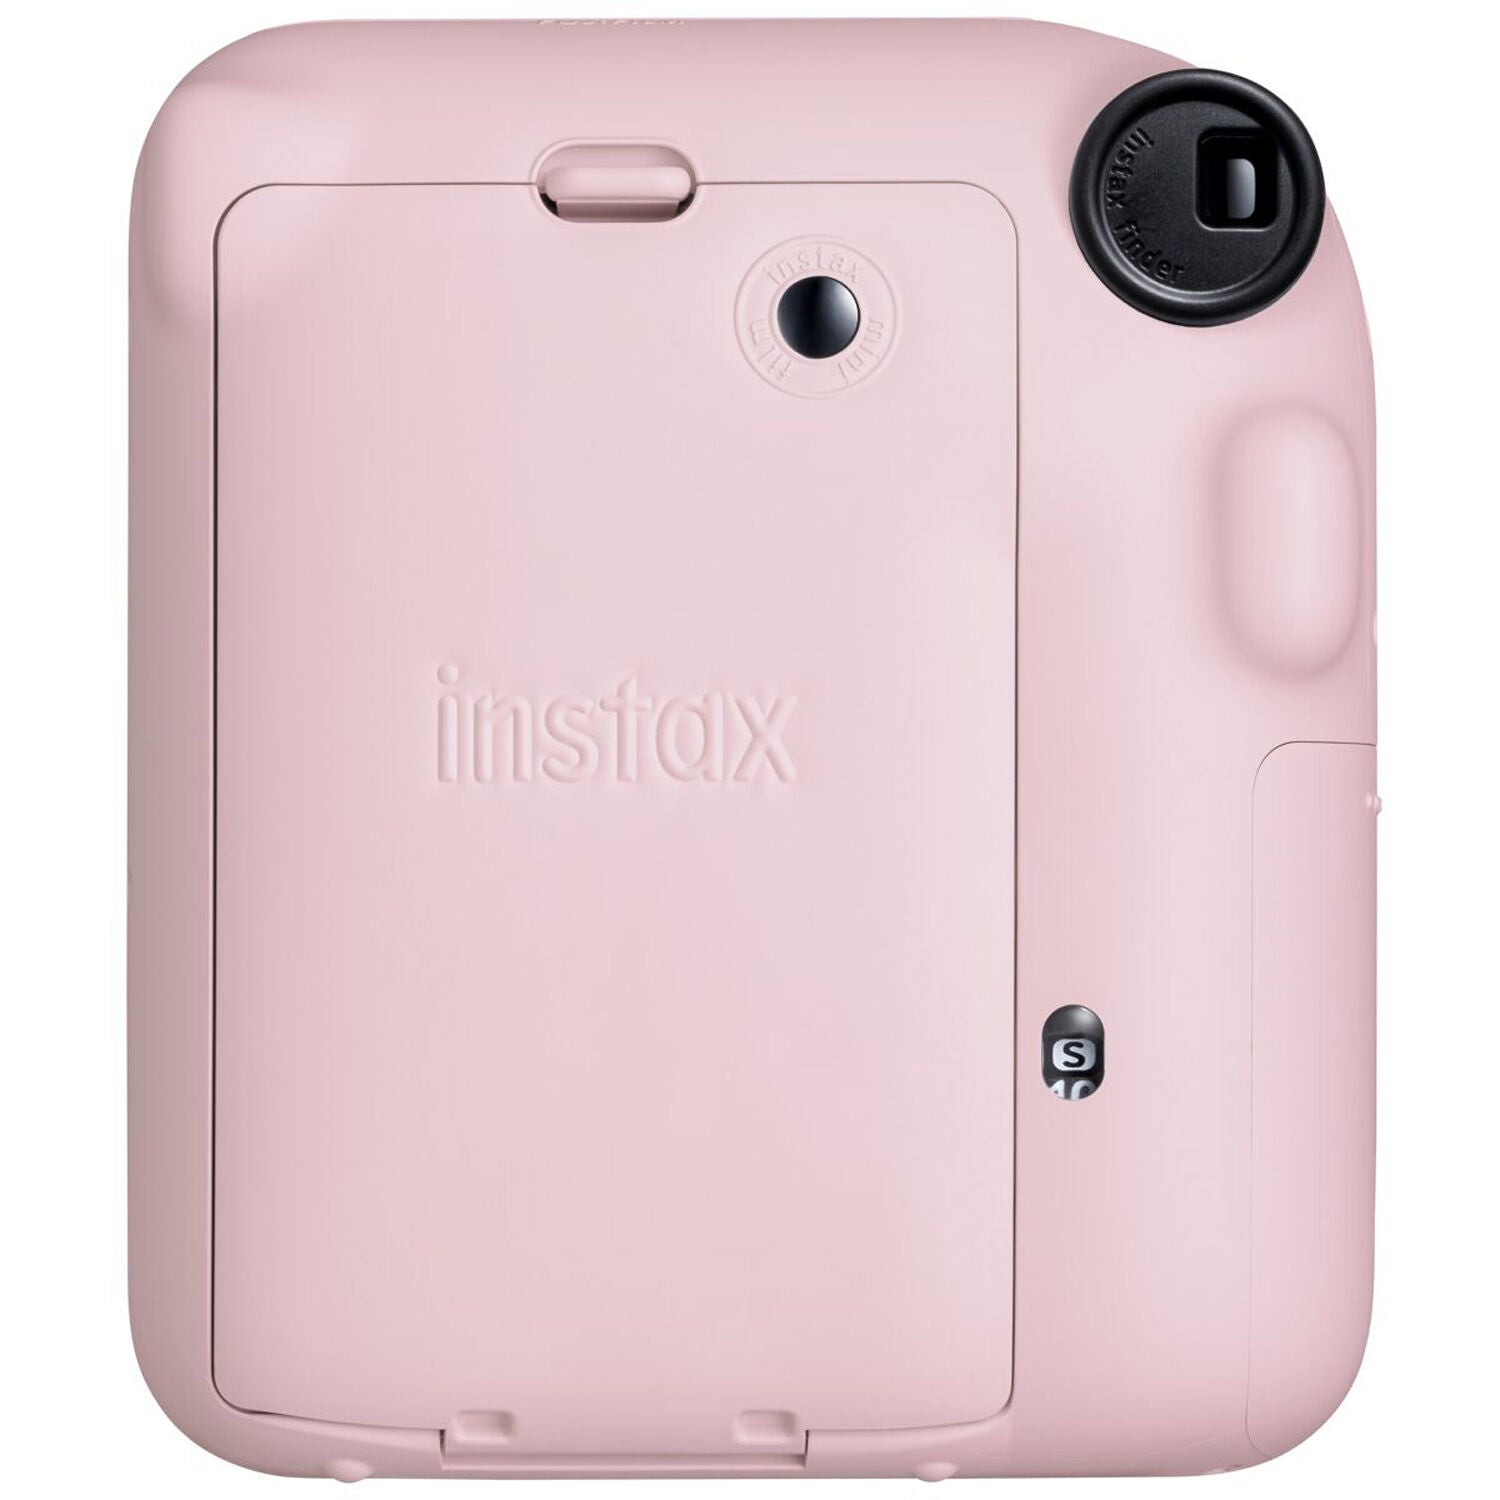 Fujifilm INSTAX Mini 12 Instant Camera with 10 Shot and Panda pouch (Blossom Pink)